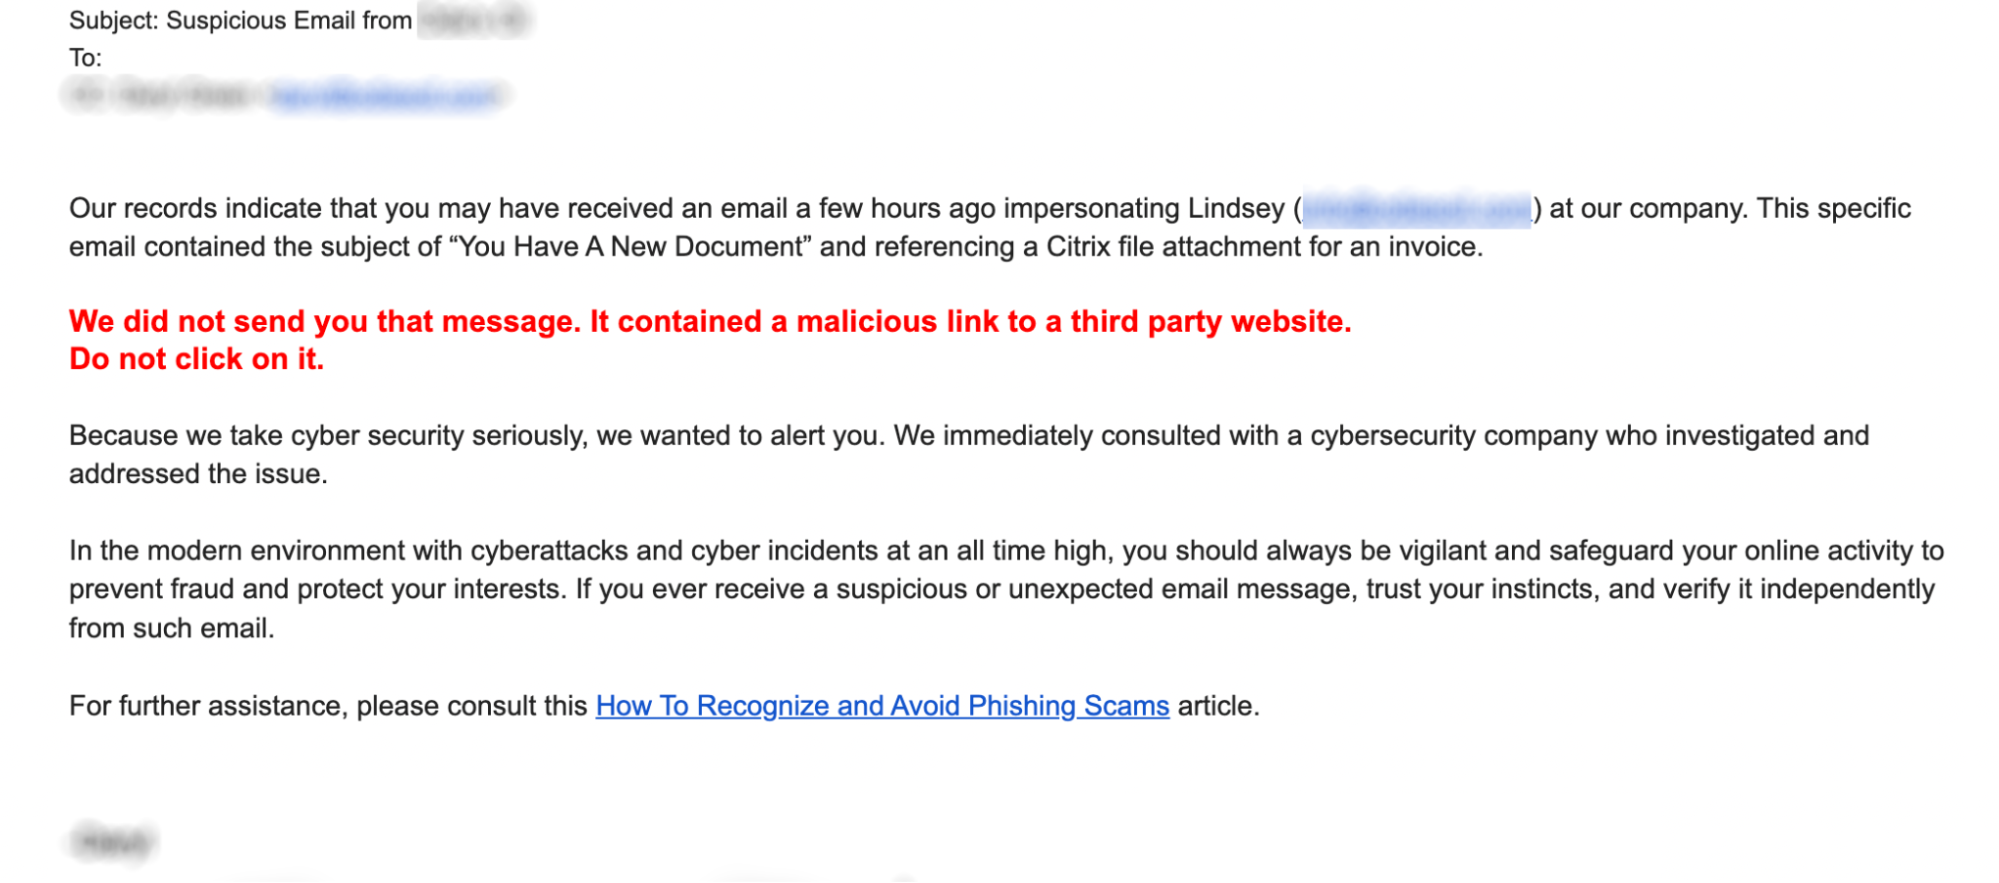 An image of the email sent to tell users about the phishing email.